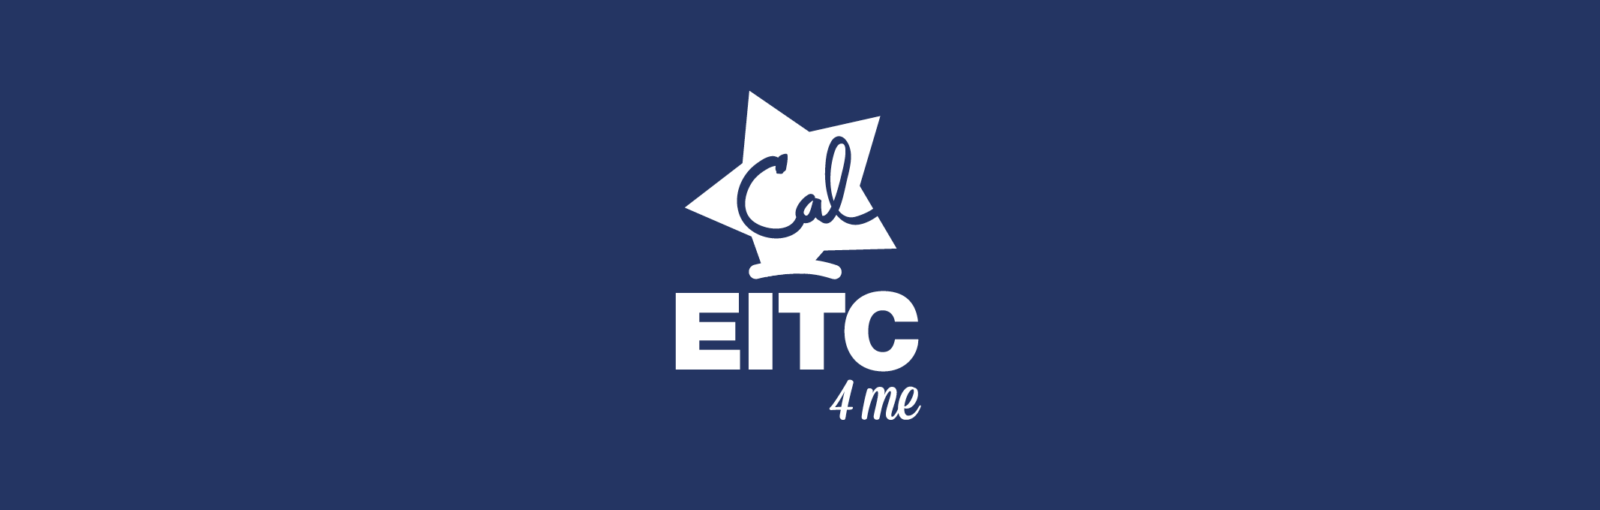 banner: CalEITC4Me, a project of Golden State Opportunity